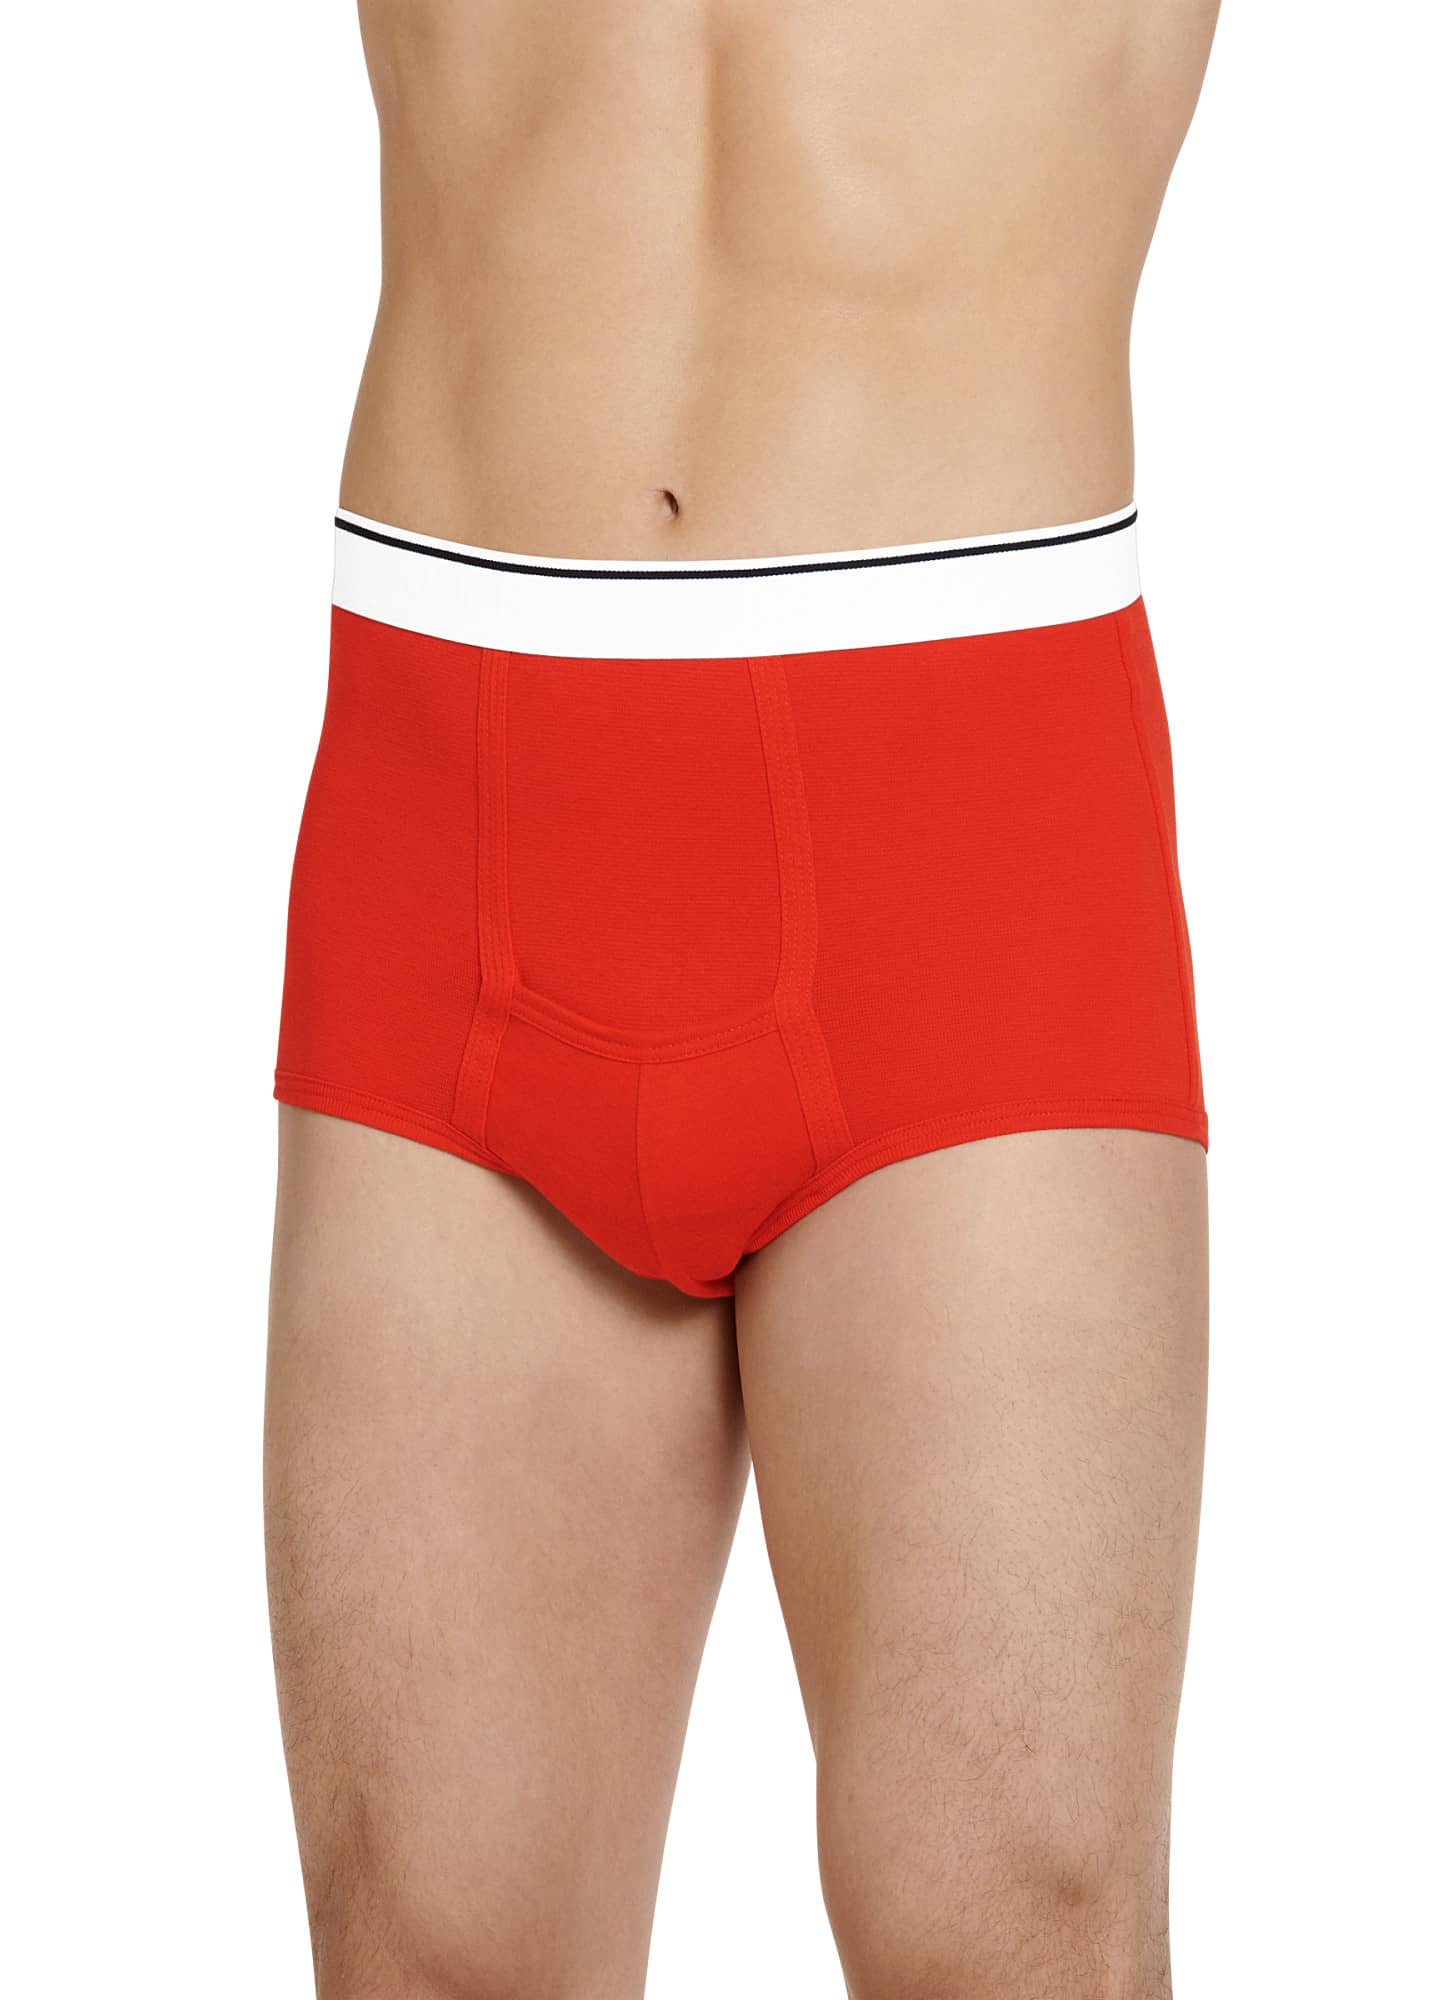 Buy Jockey Bright Red High Cut Exposed Waistband Briefs for Men